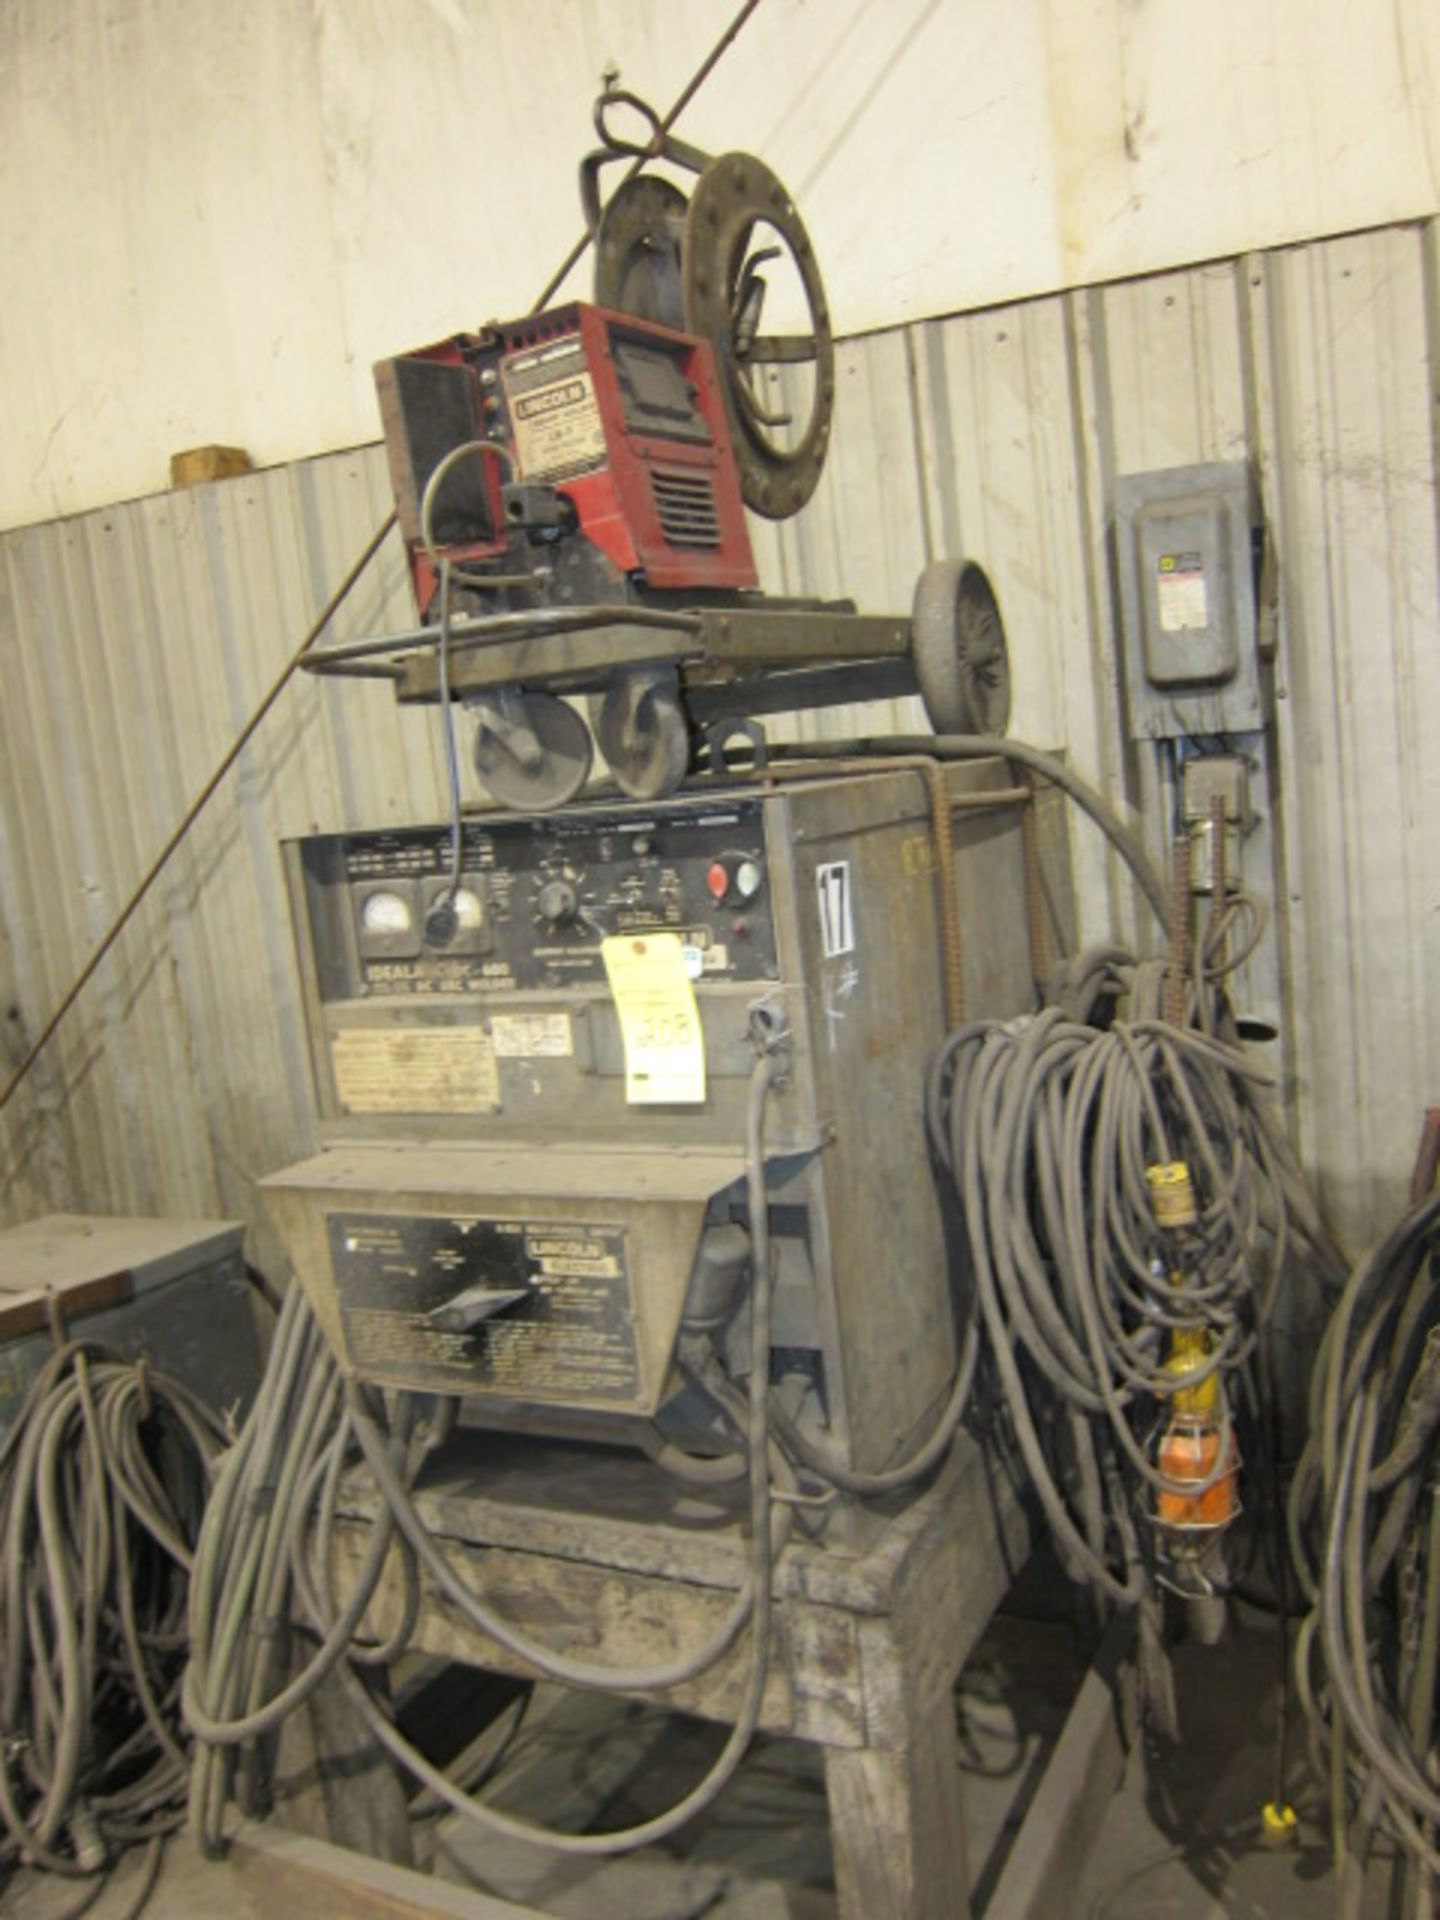 WELDING MACHINE, LINCOLN MDL. DC600, 600 amps @ 44 v., 100% duty cycle, w/wire feeders, S/N